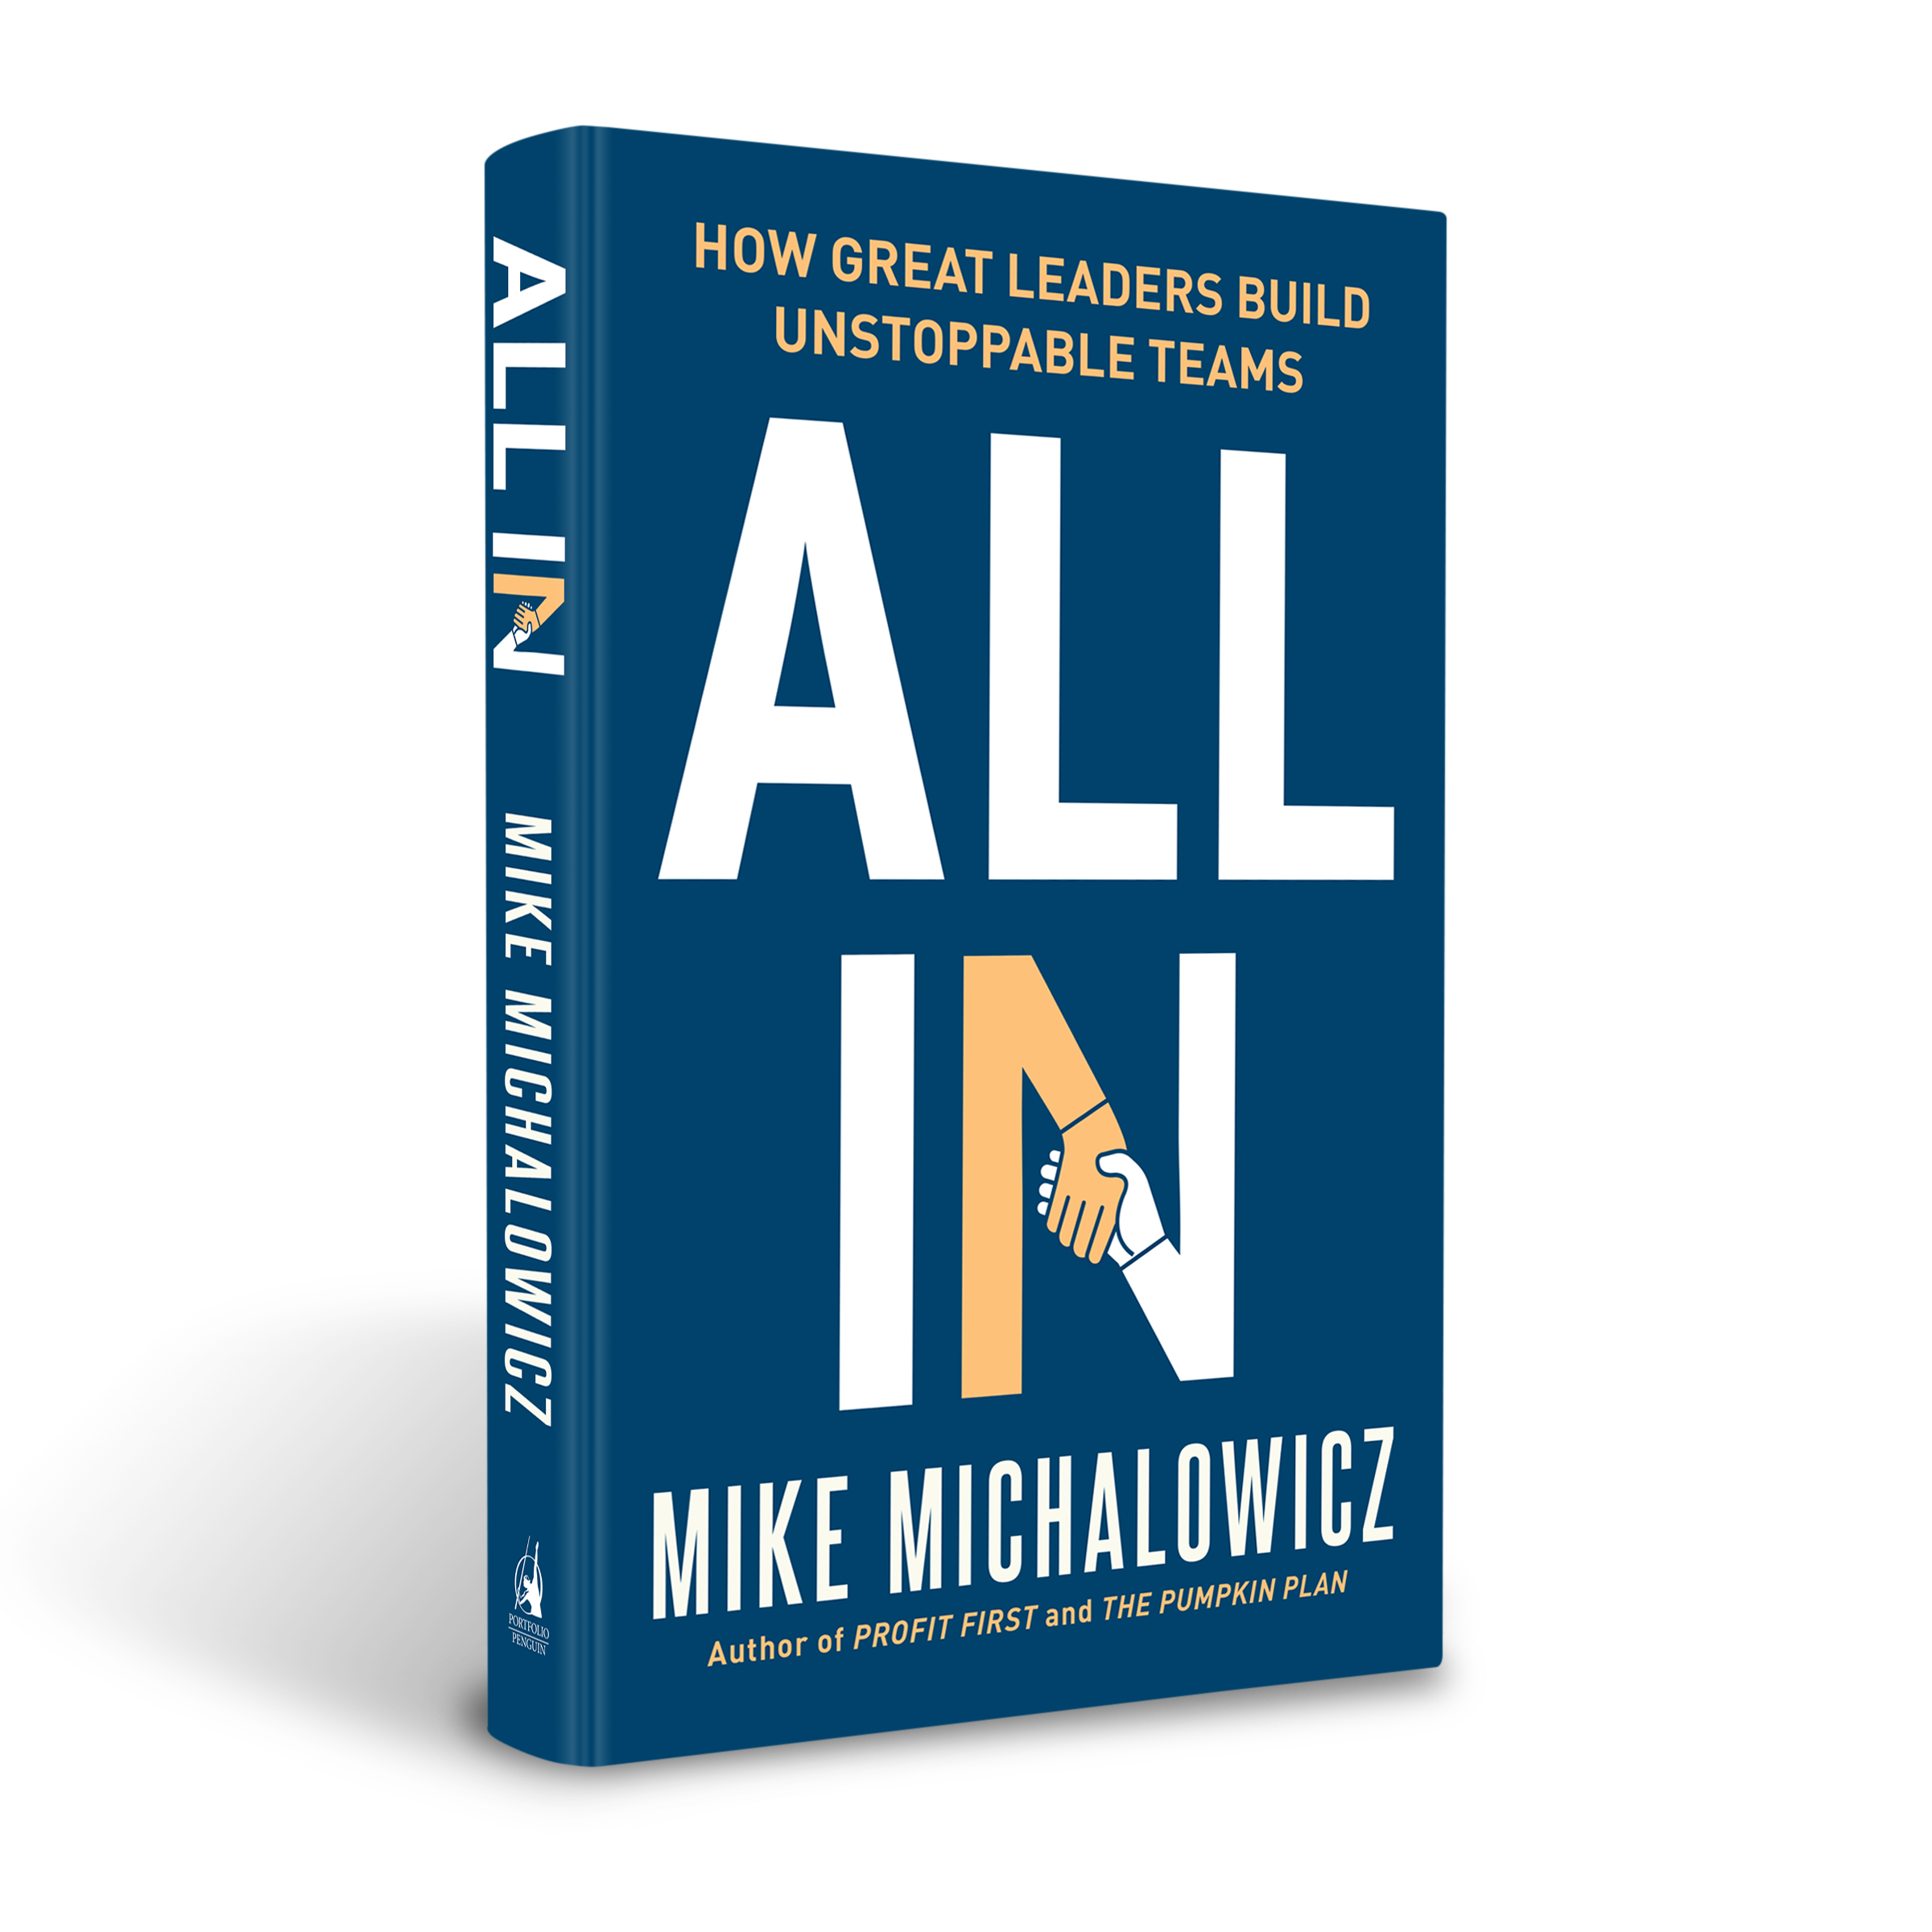 ALL IN -  Limited Edition Bound Manuscript